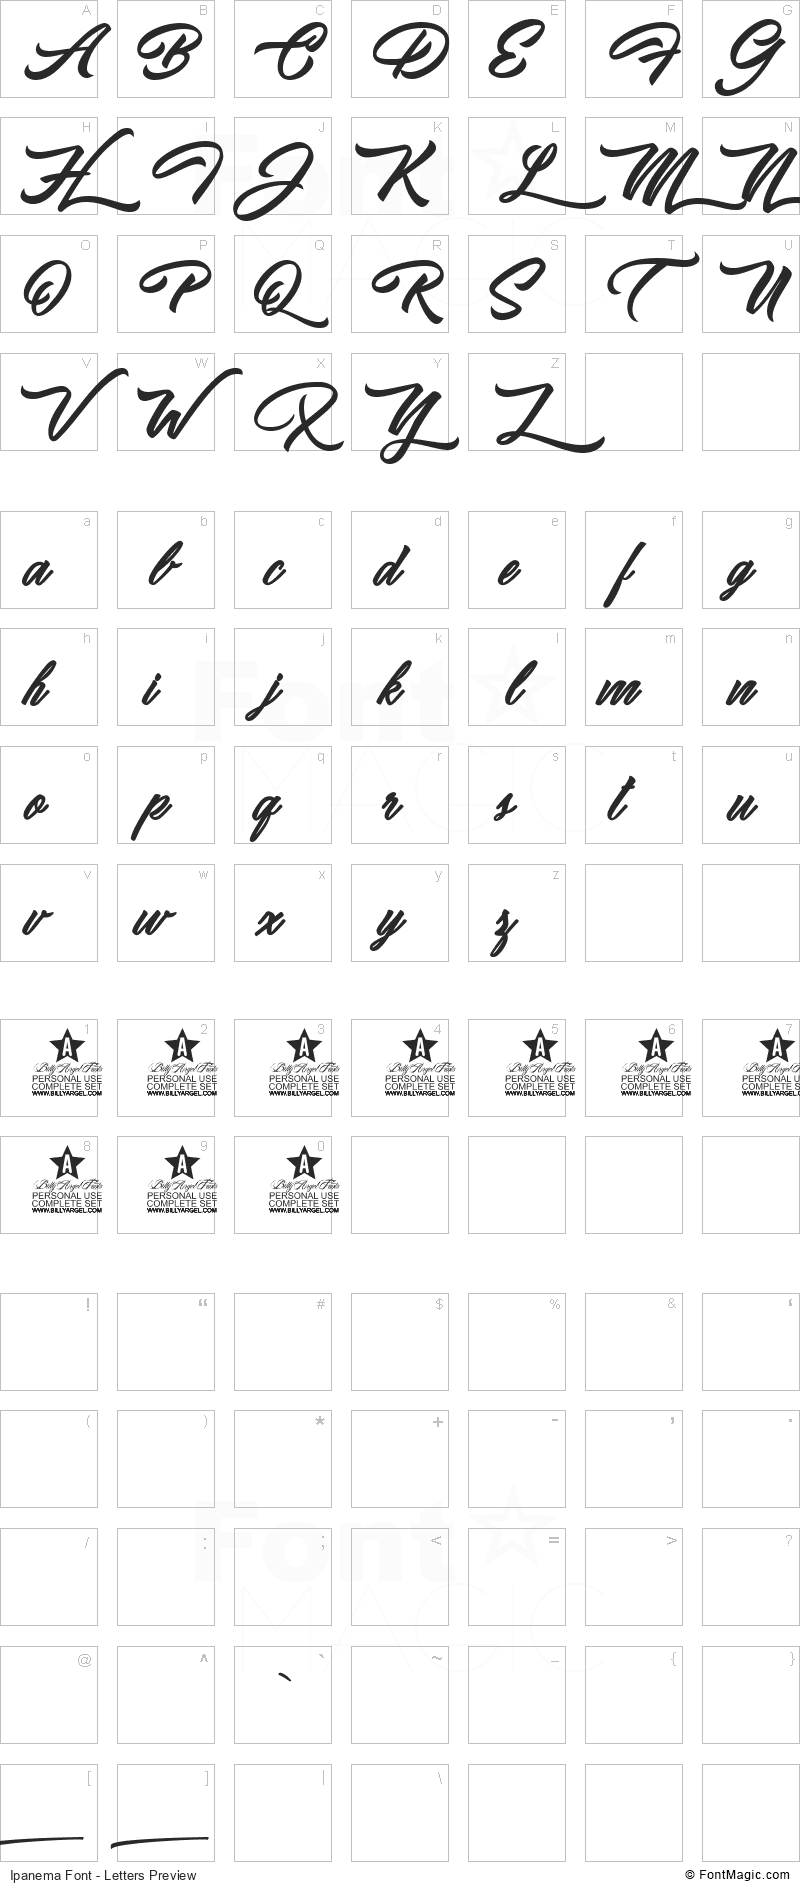 Ipanema Font - All Latters Preview Chart